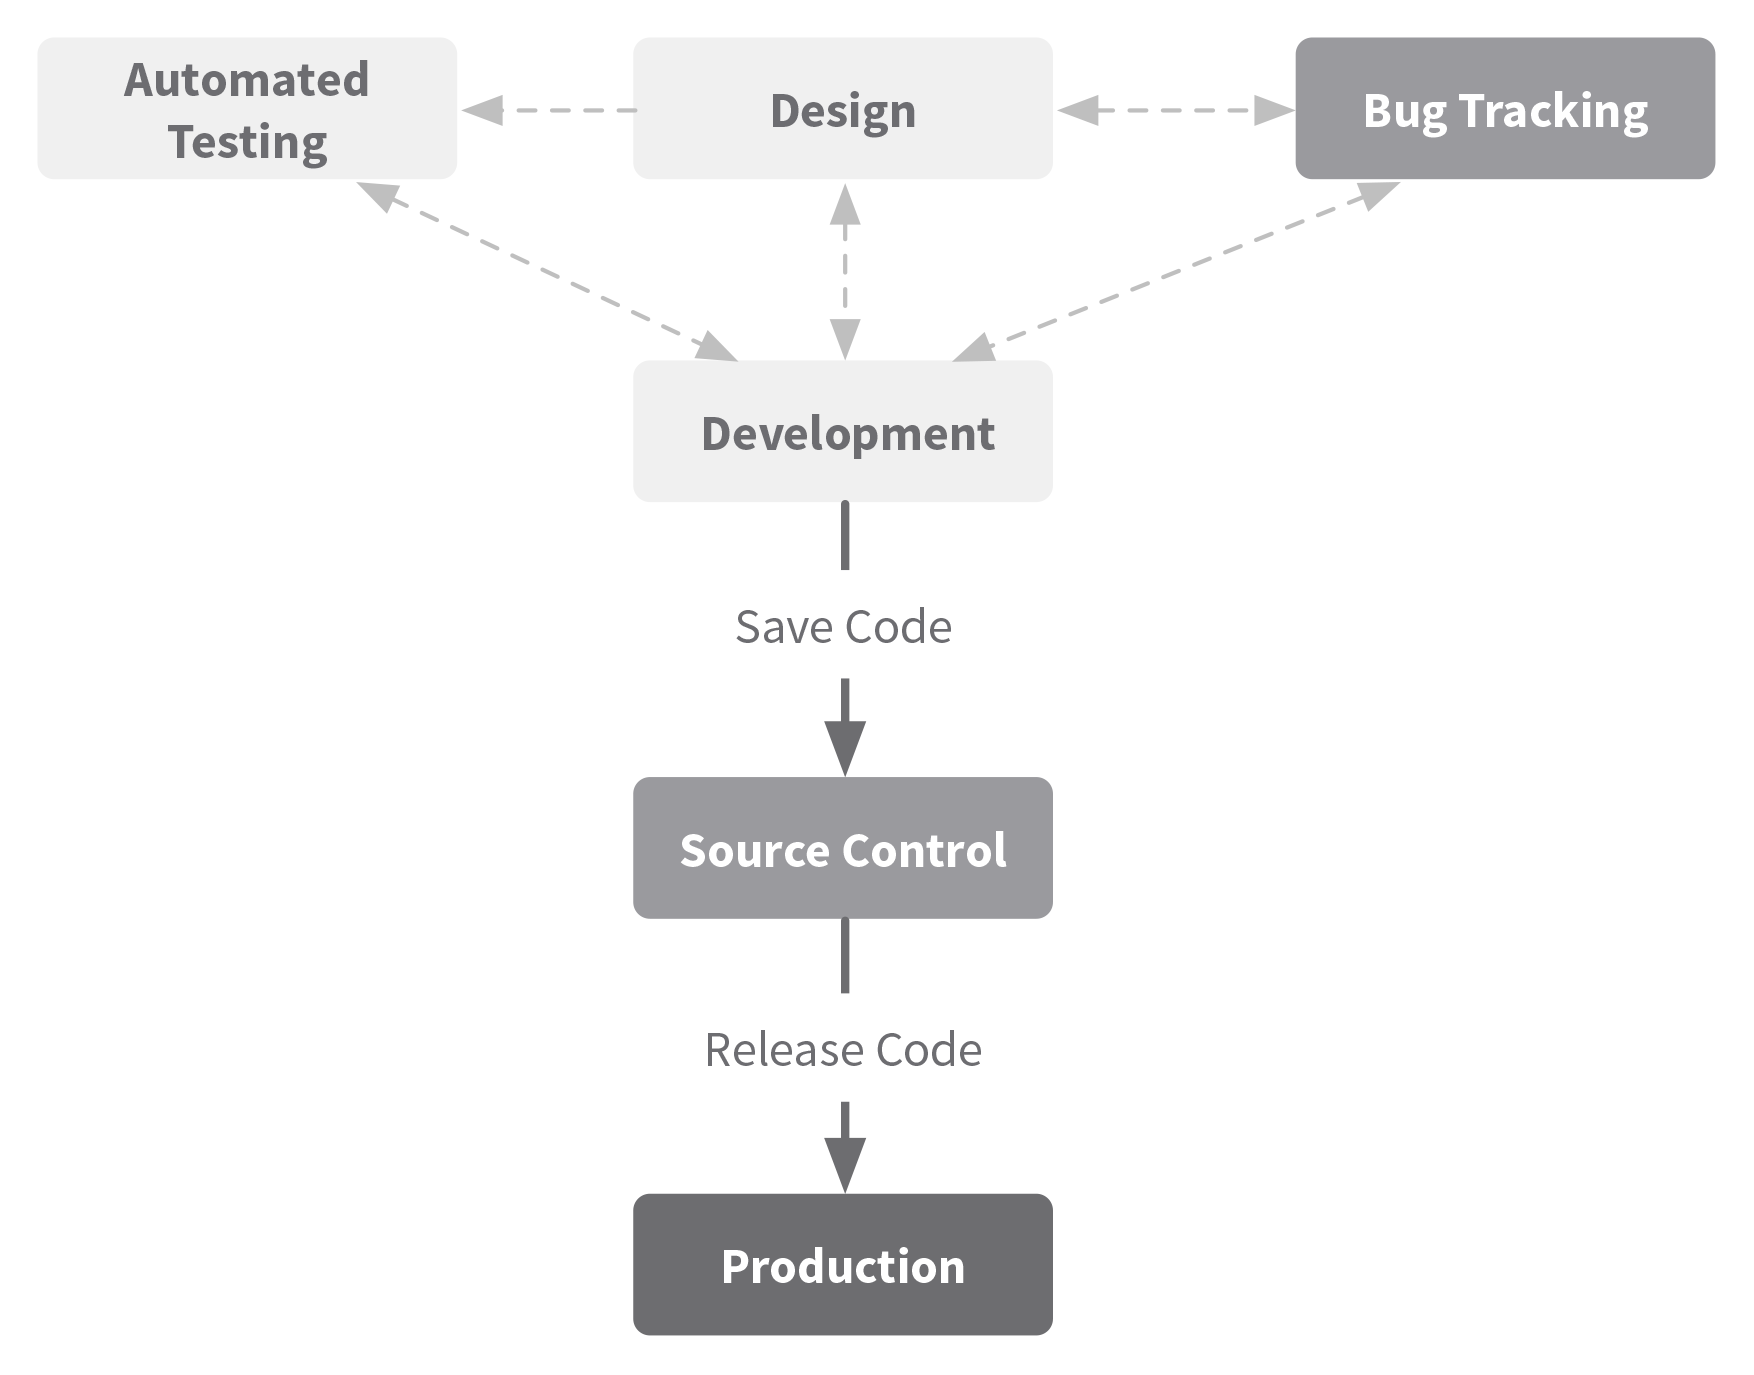 Expanding on the previous diagrams by illustrating bug tracking the development process.